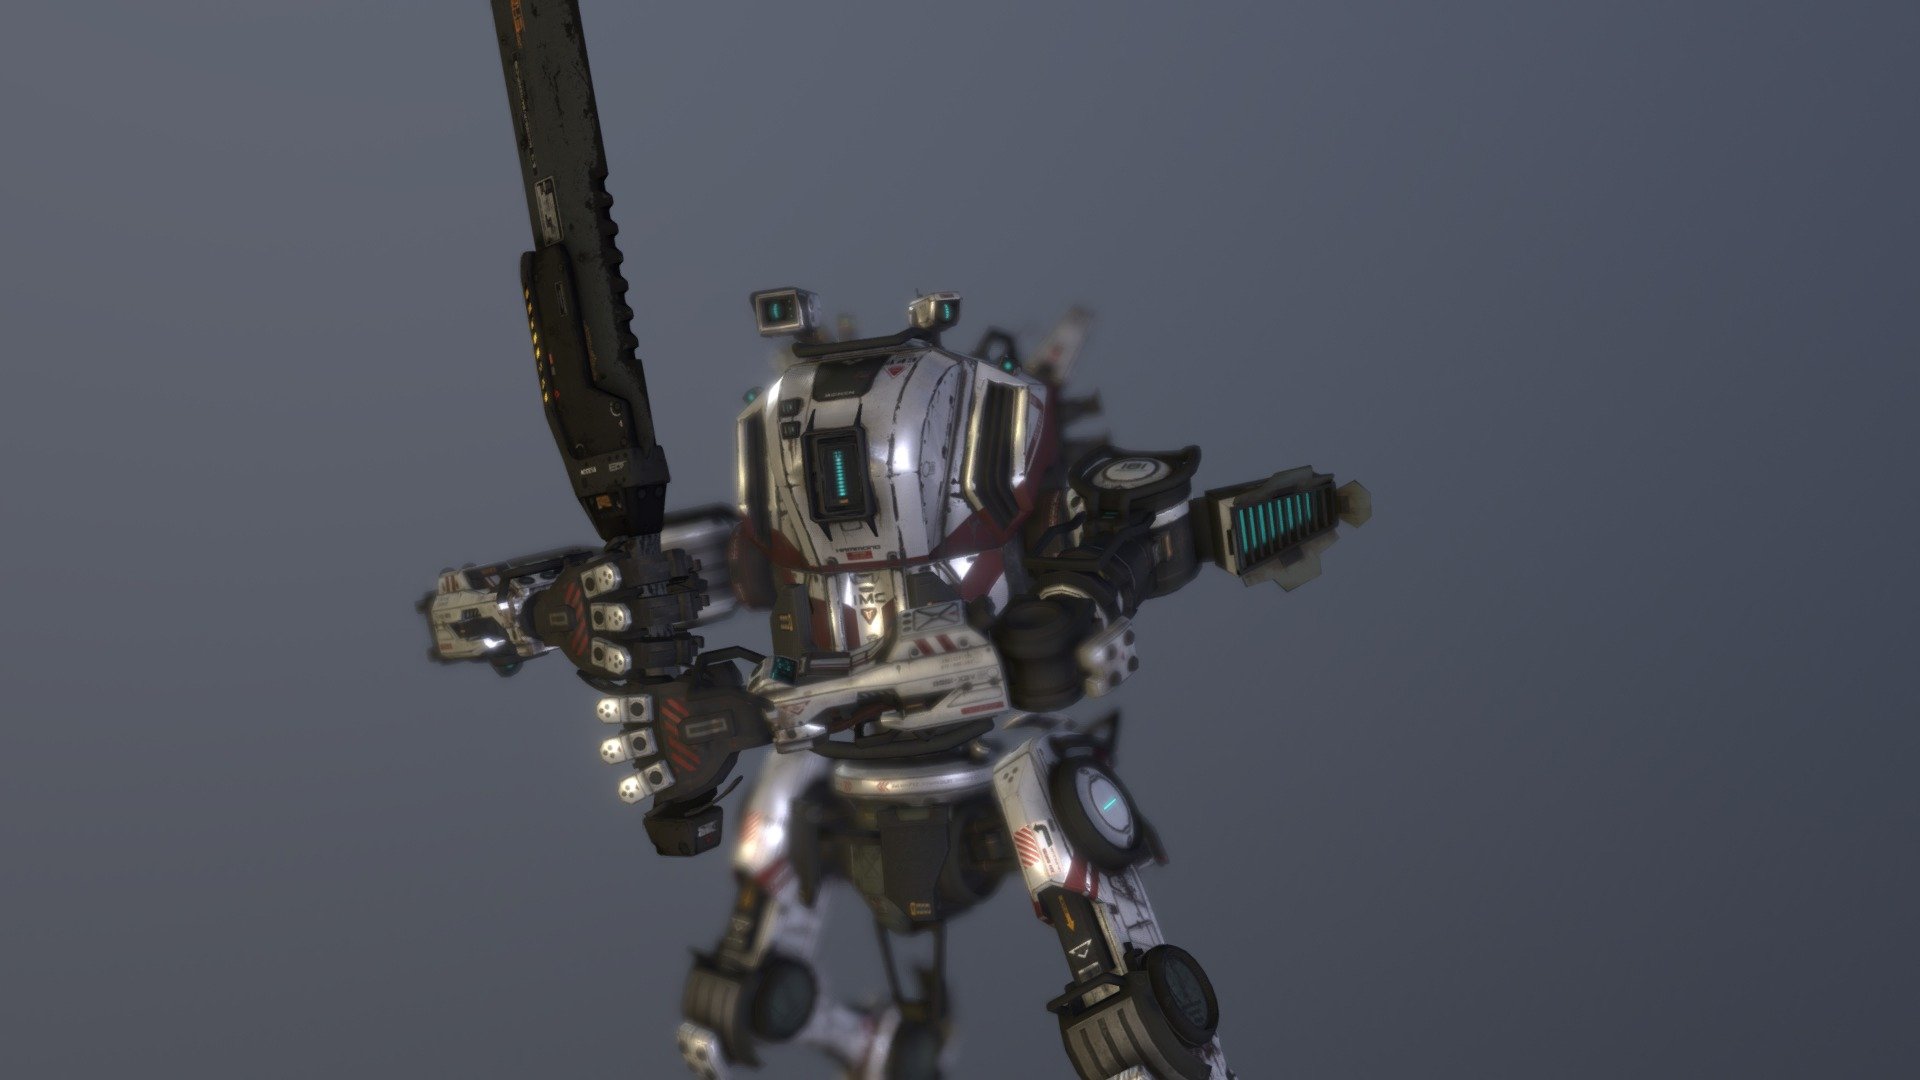 Problems? Ask google, I don't have the file anymore and therefore can't give any information.
Converted SFM Ronin model from Alpha_Derp: https://sfmlab.com/item/2907/ - Titanfall 2 Ronin - Download Free 3D model by Palurdas Arts (@PalurdasArts) 3d model